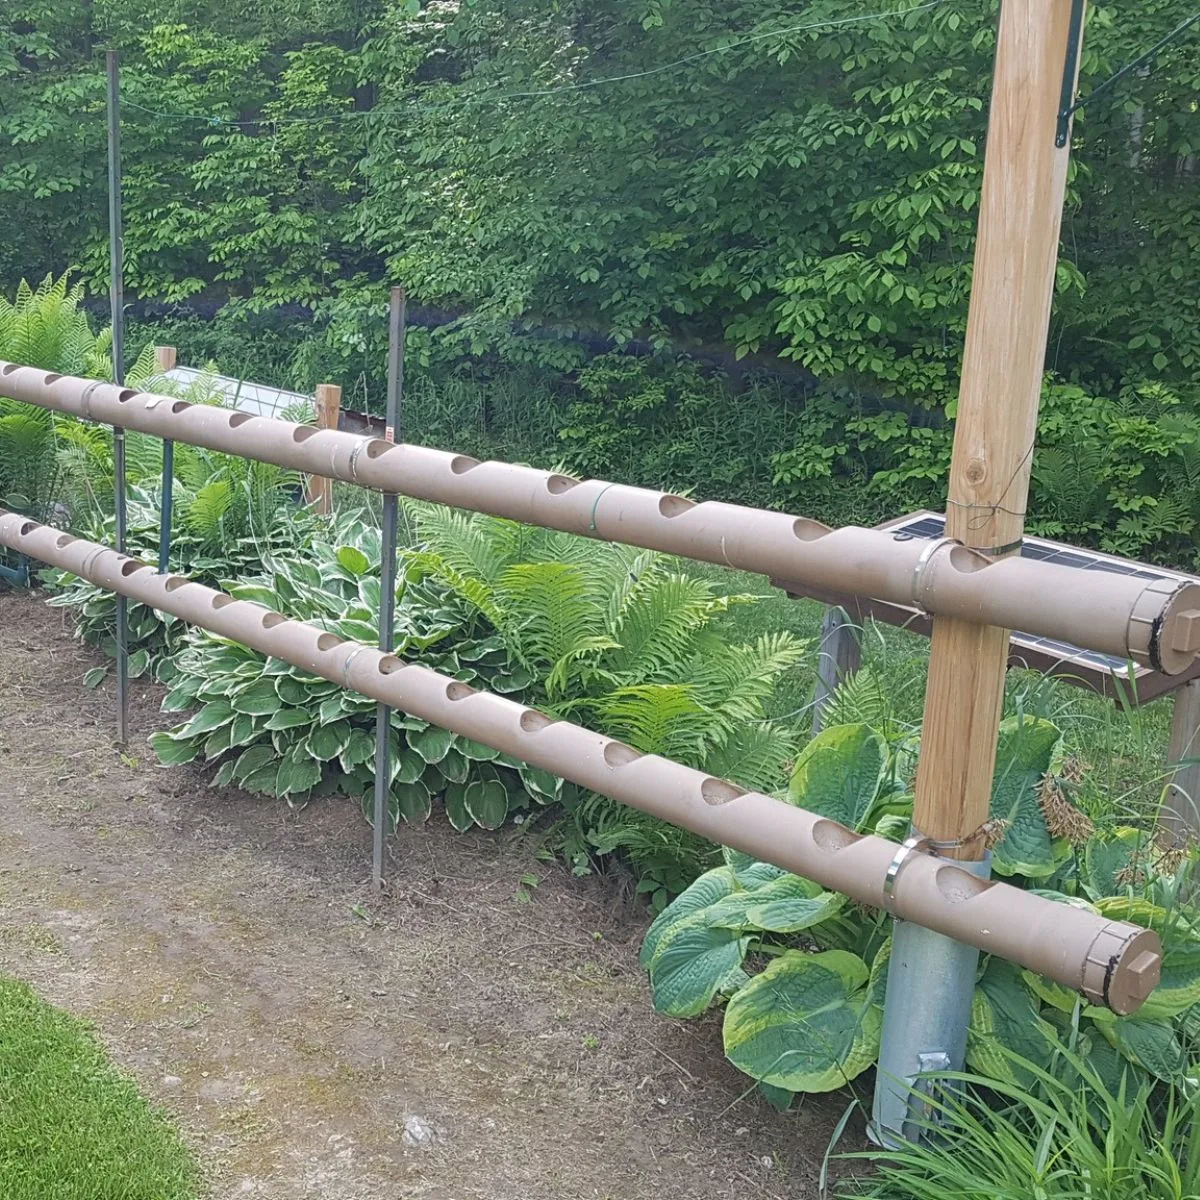 pvc pipes set up for a vertical hydroponic garden